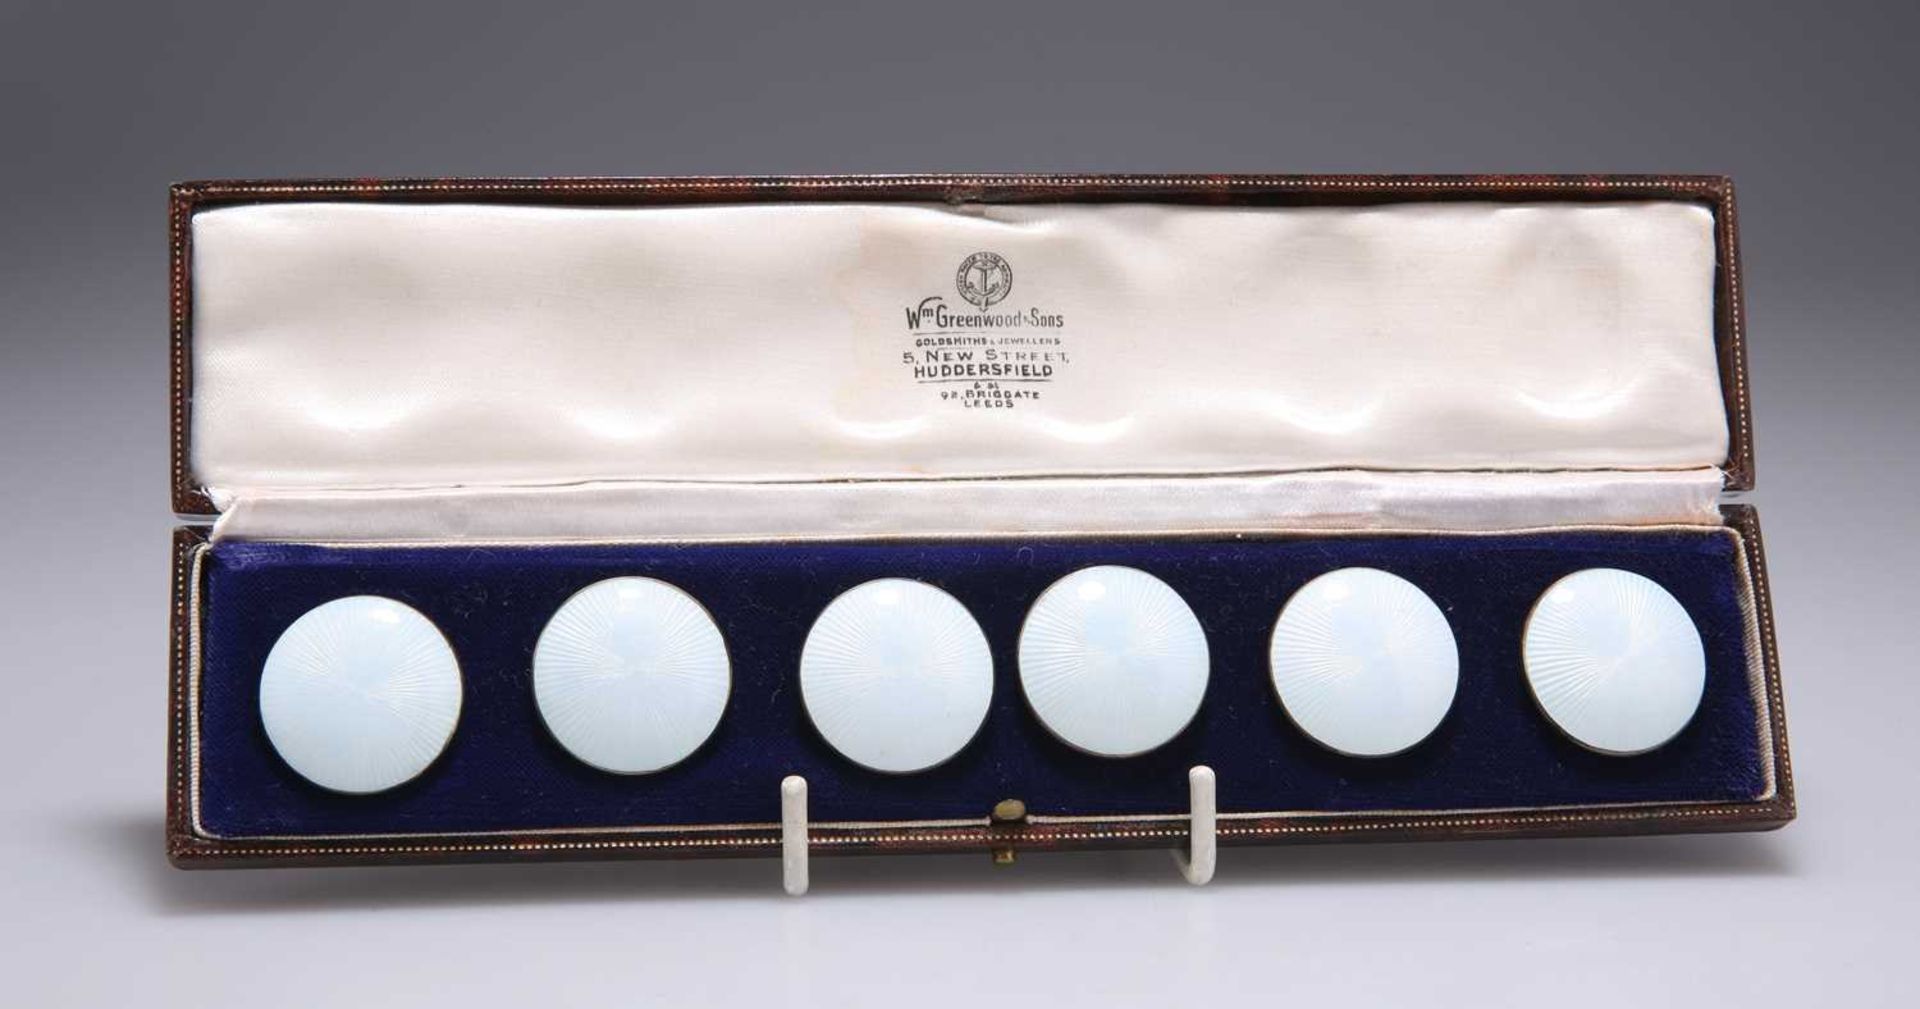 A SET OF SIX NORWEGIAN SILVER AND GUILLOCHÉ ENAMEL BUTTONS